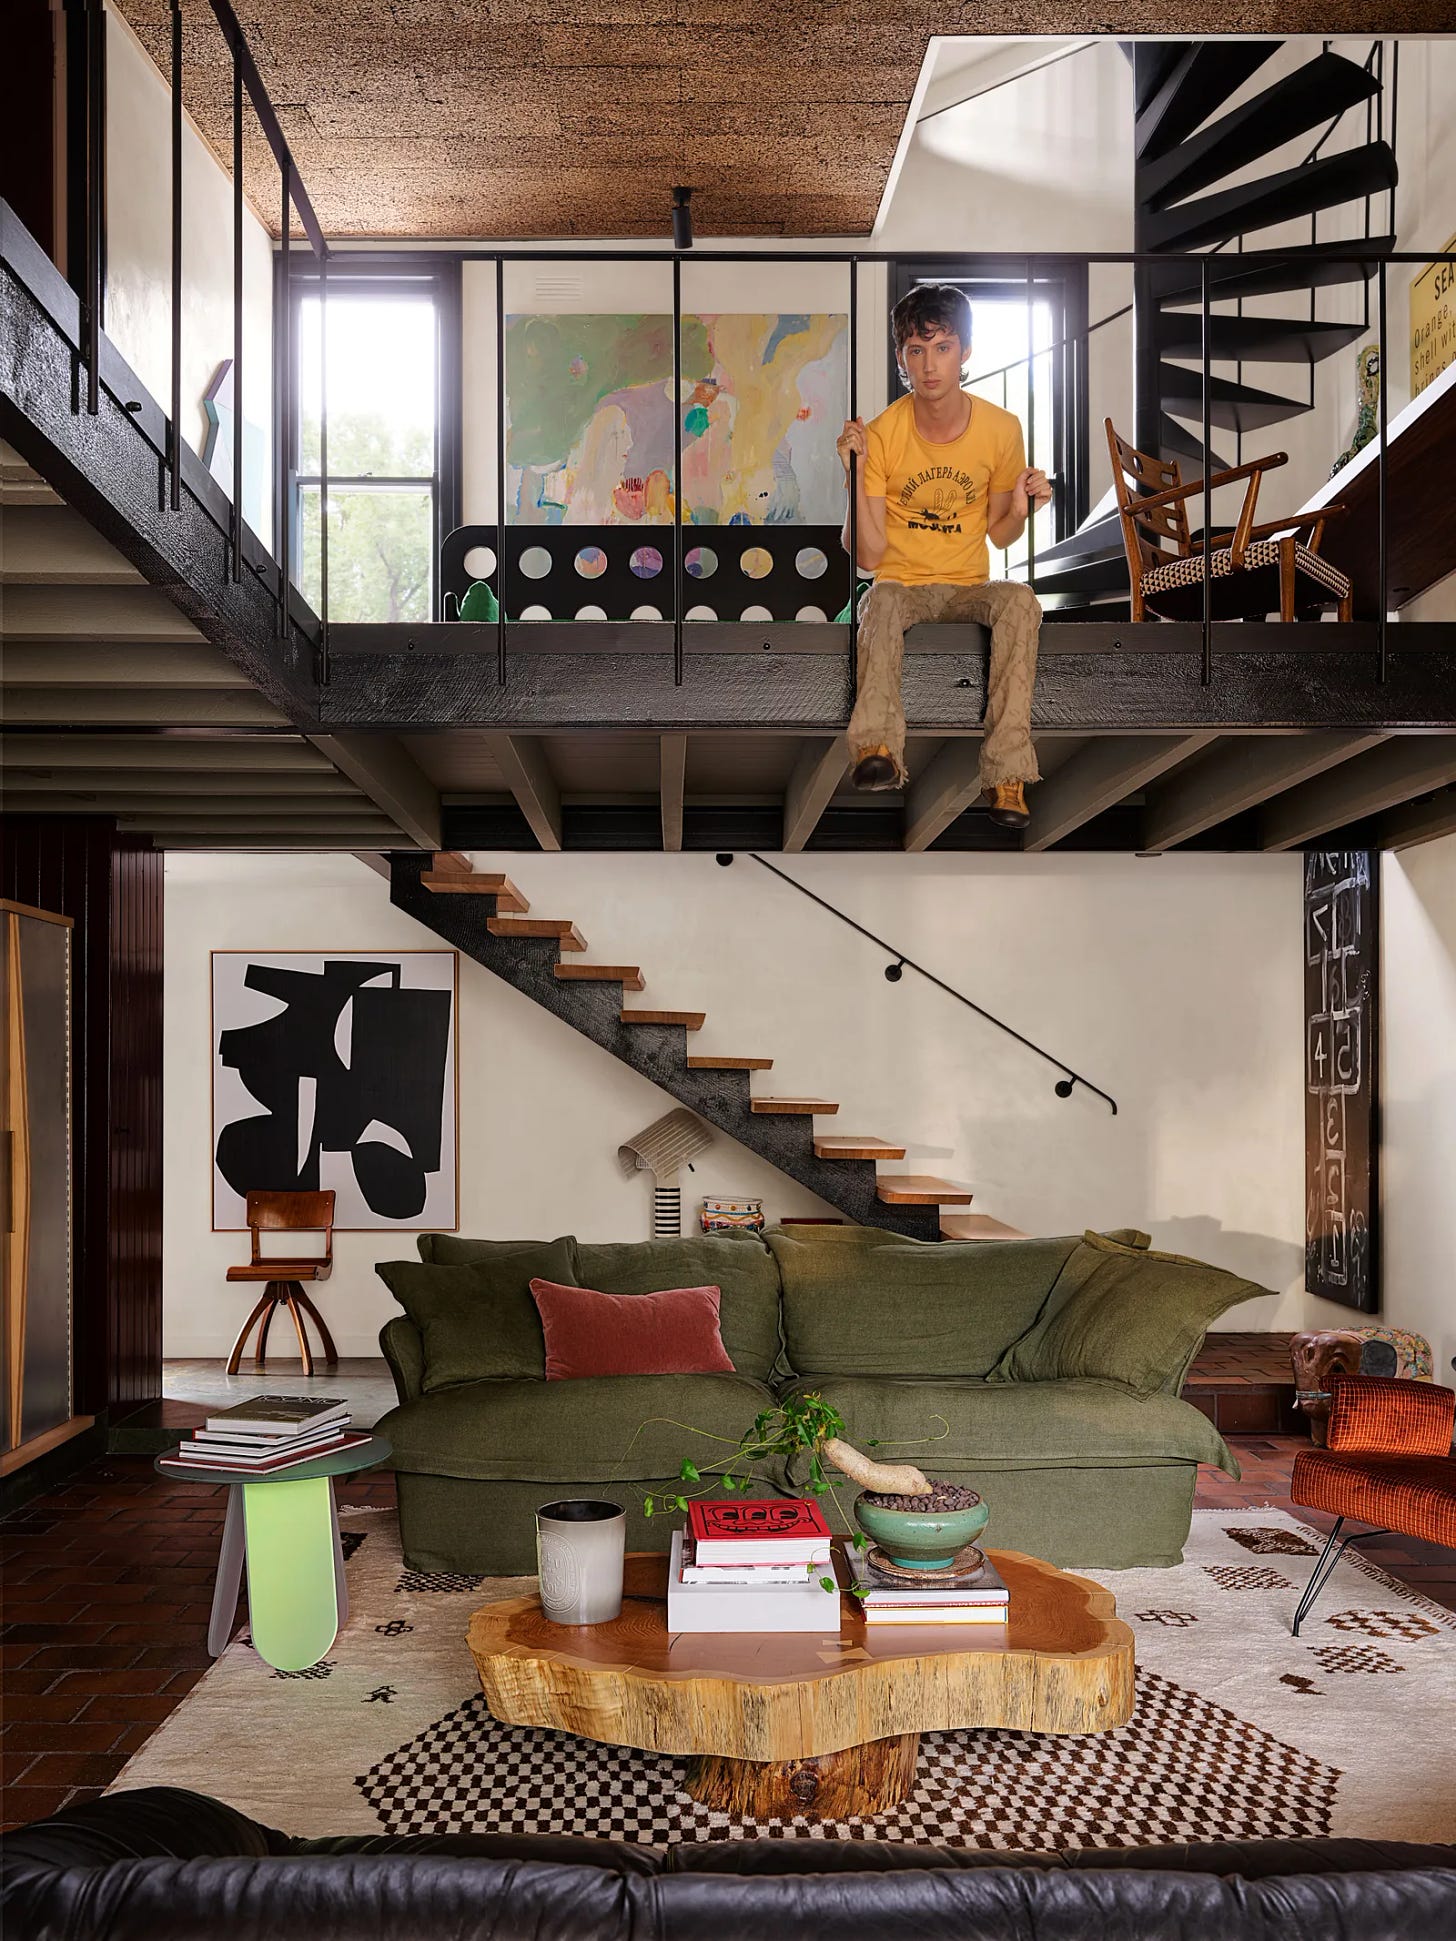 Troye Sivan for Architectural Digest sitting on his loft